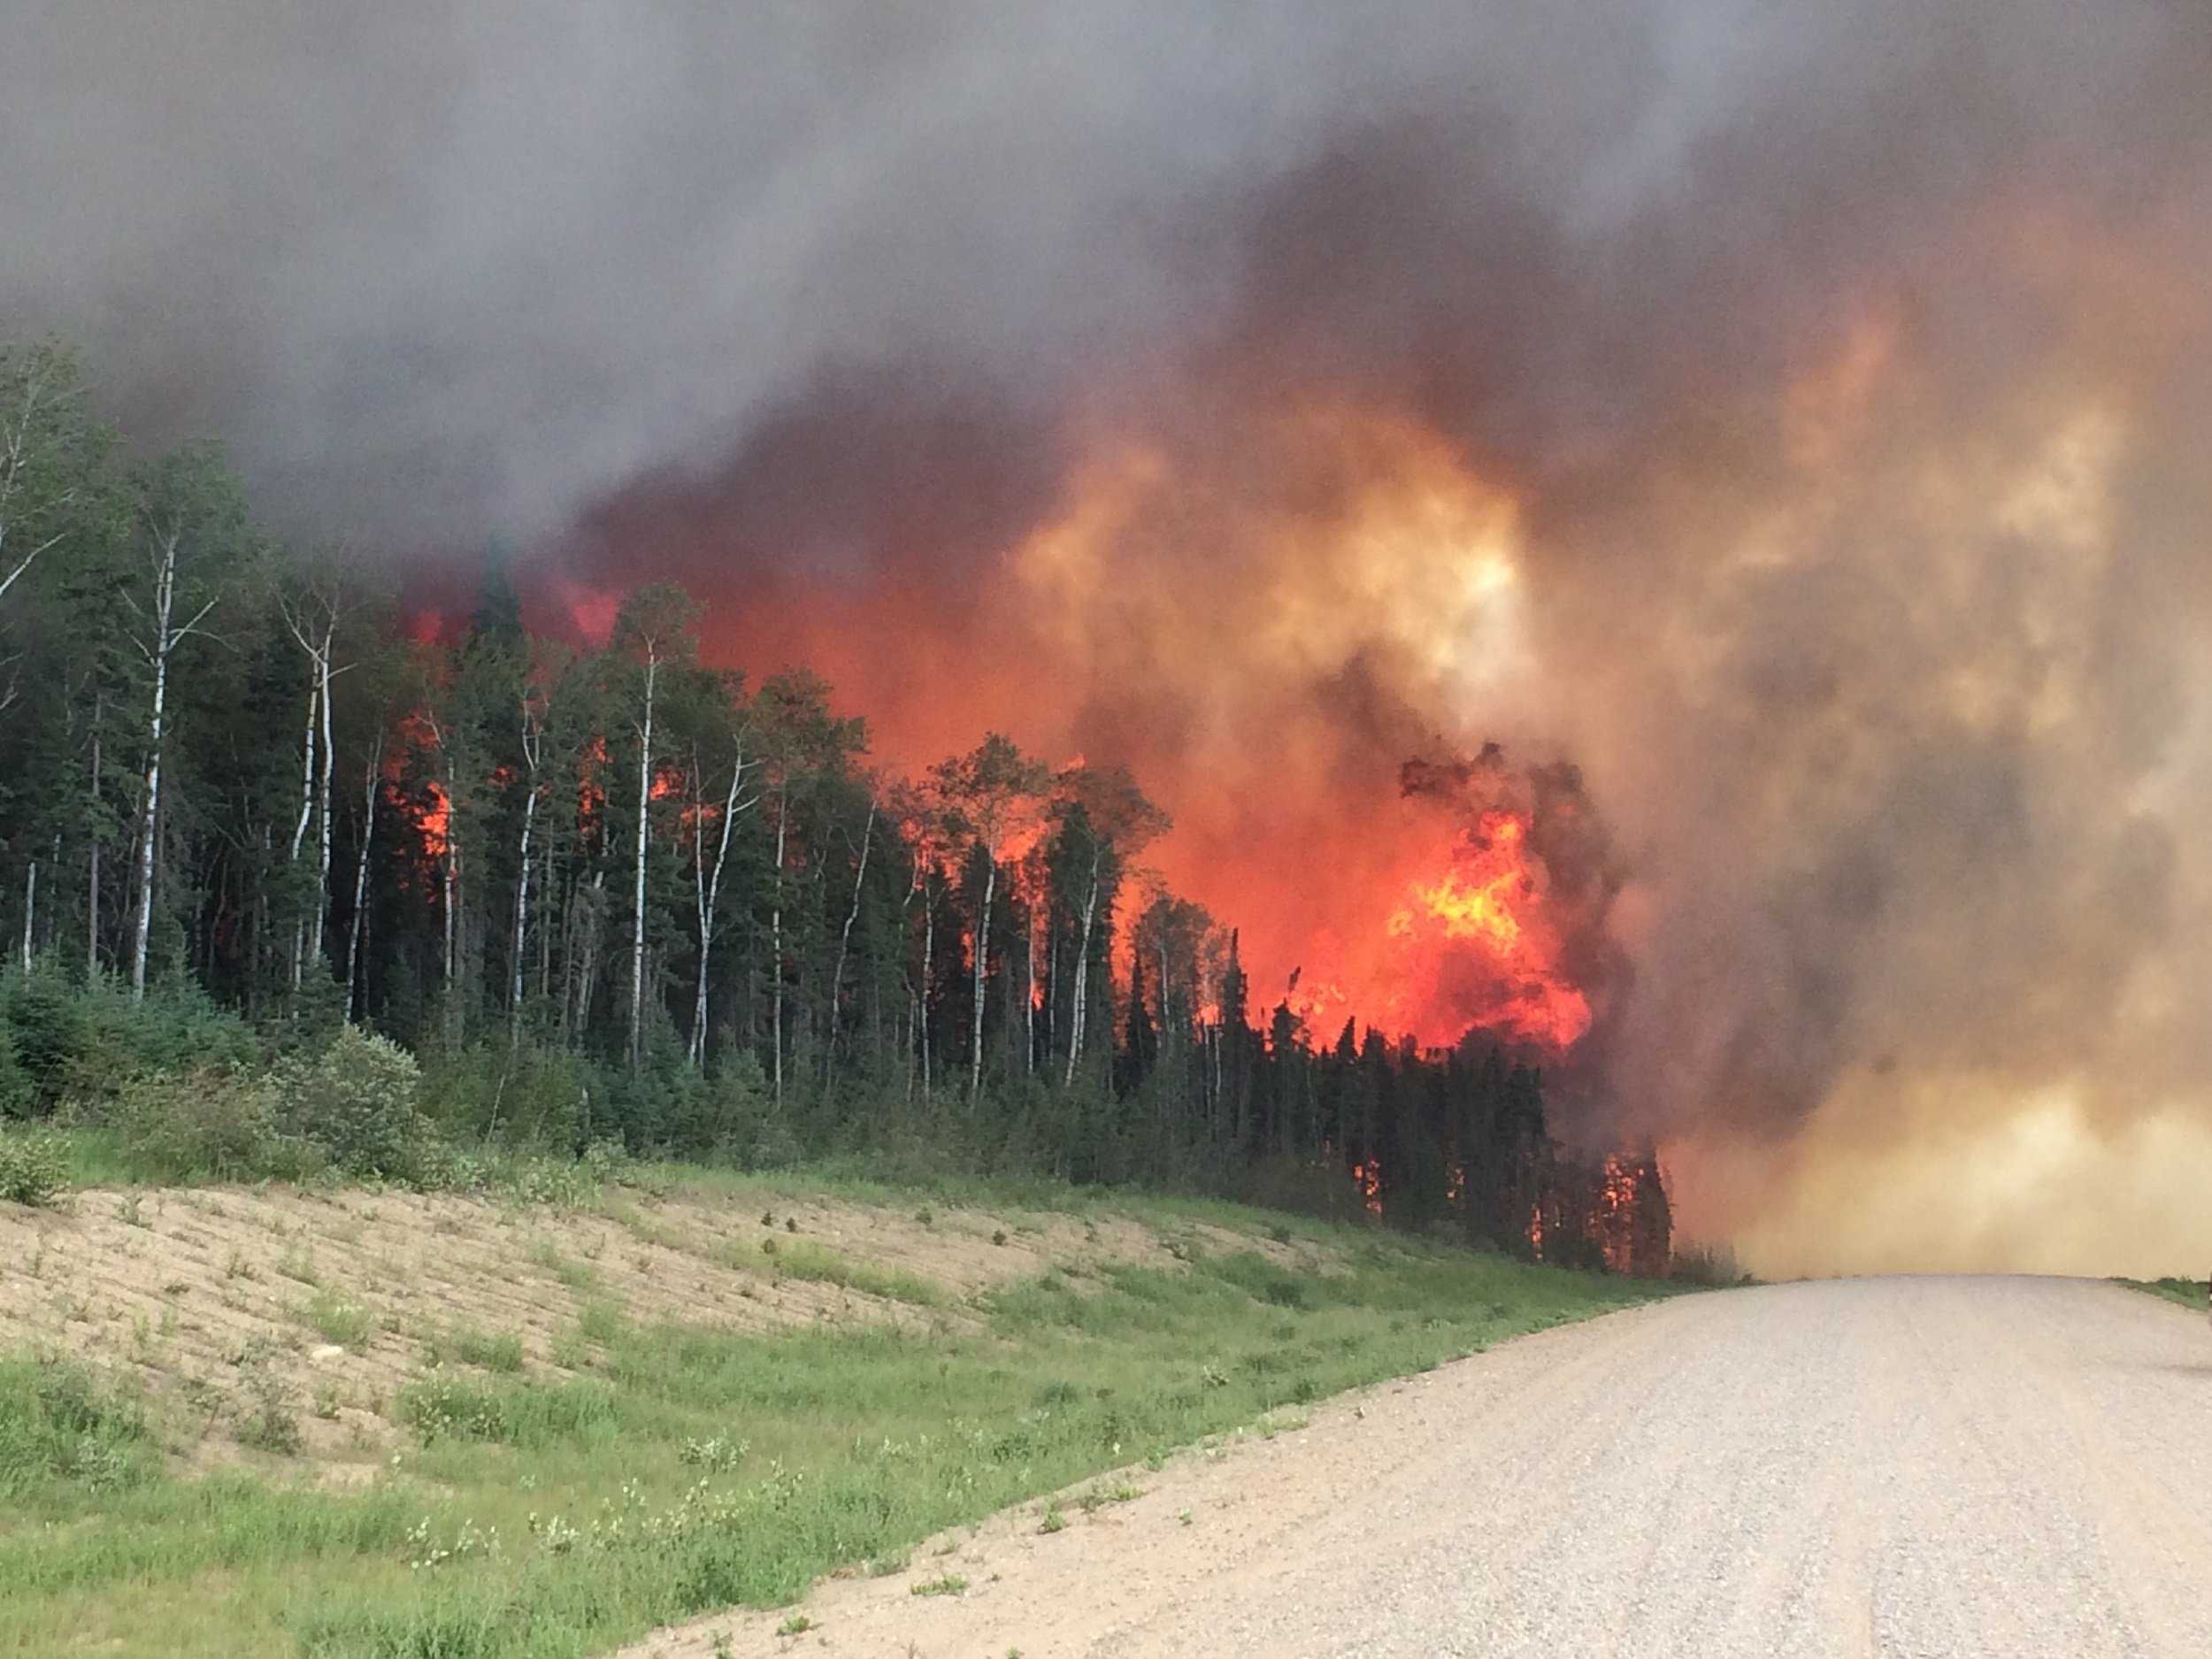 Fires burn across Alberta, forcing emergency evacuations across the province.